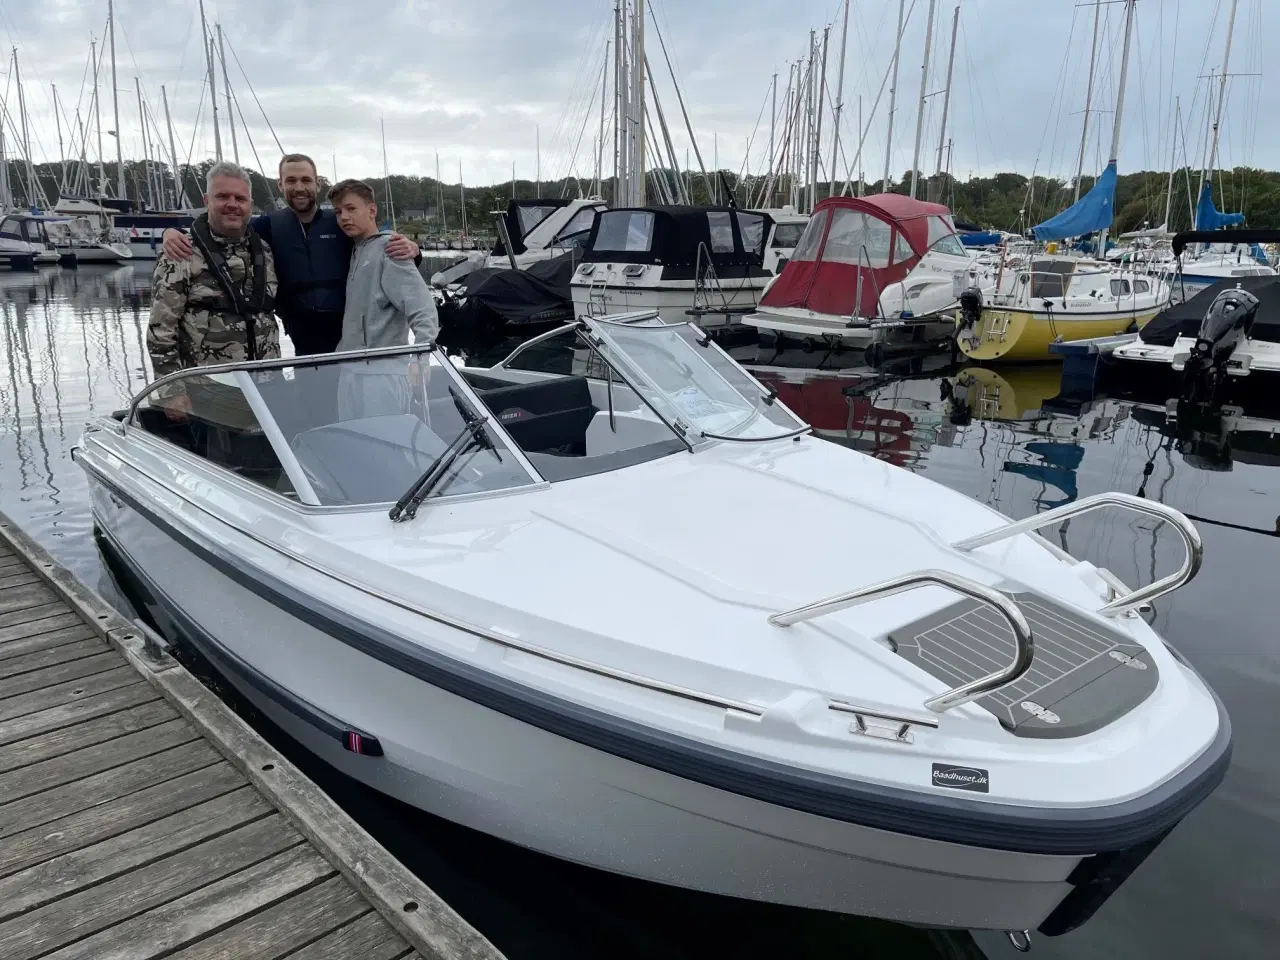 Billede 1 - Ny NORSK IBIZA 640T 140HK LUXUS